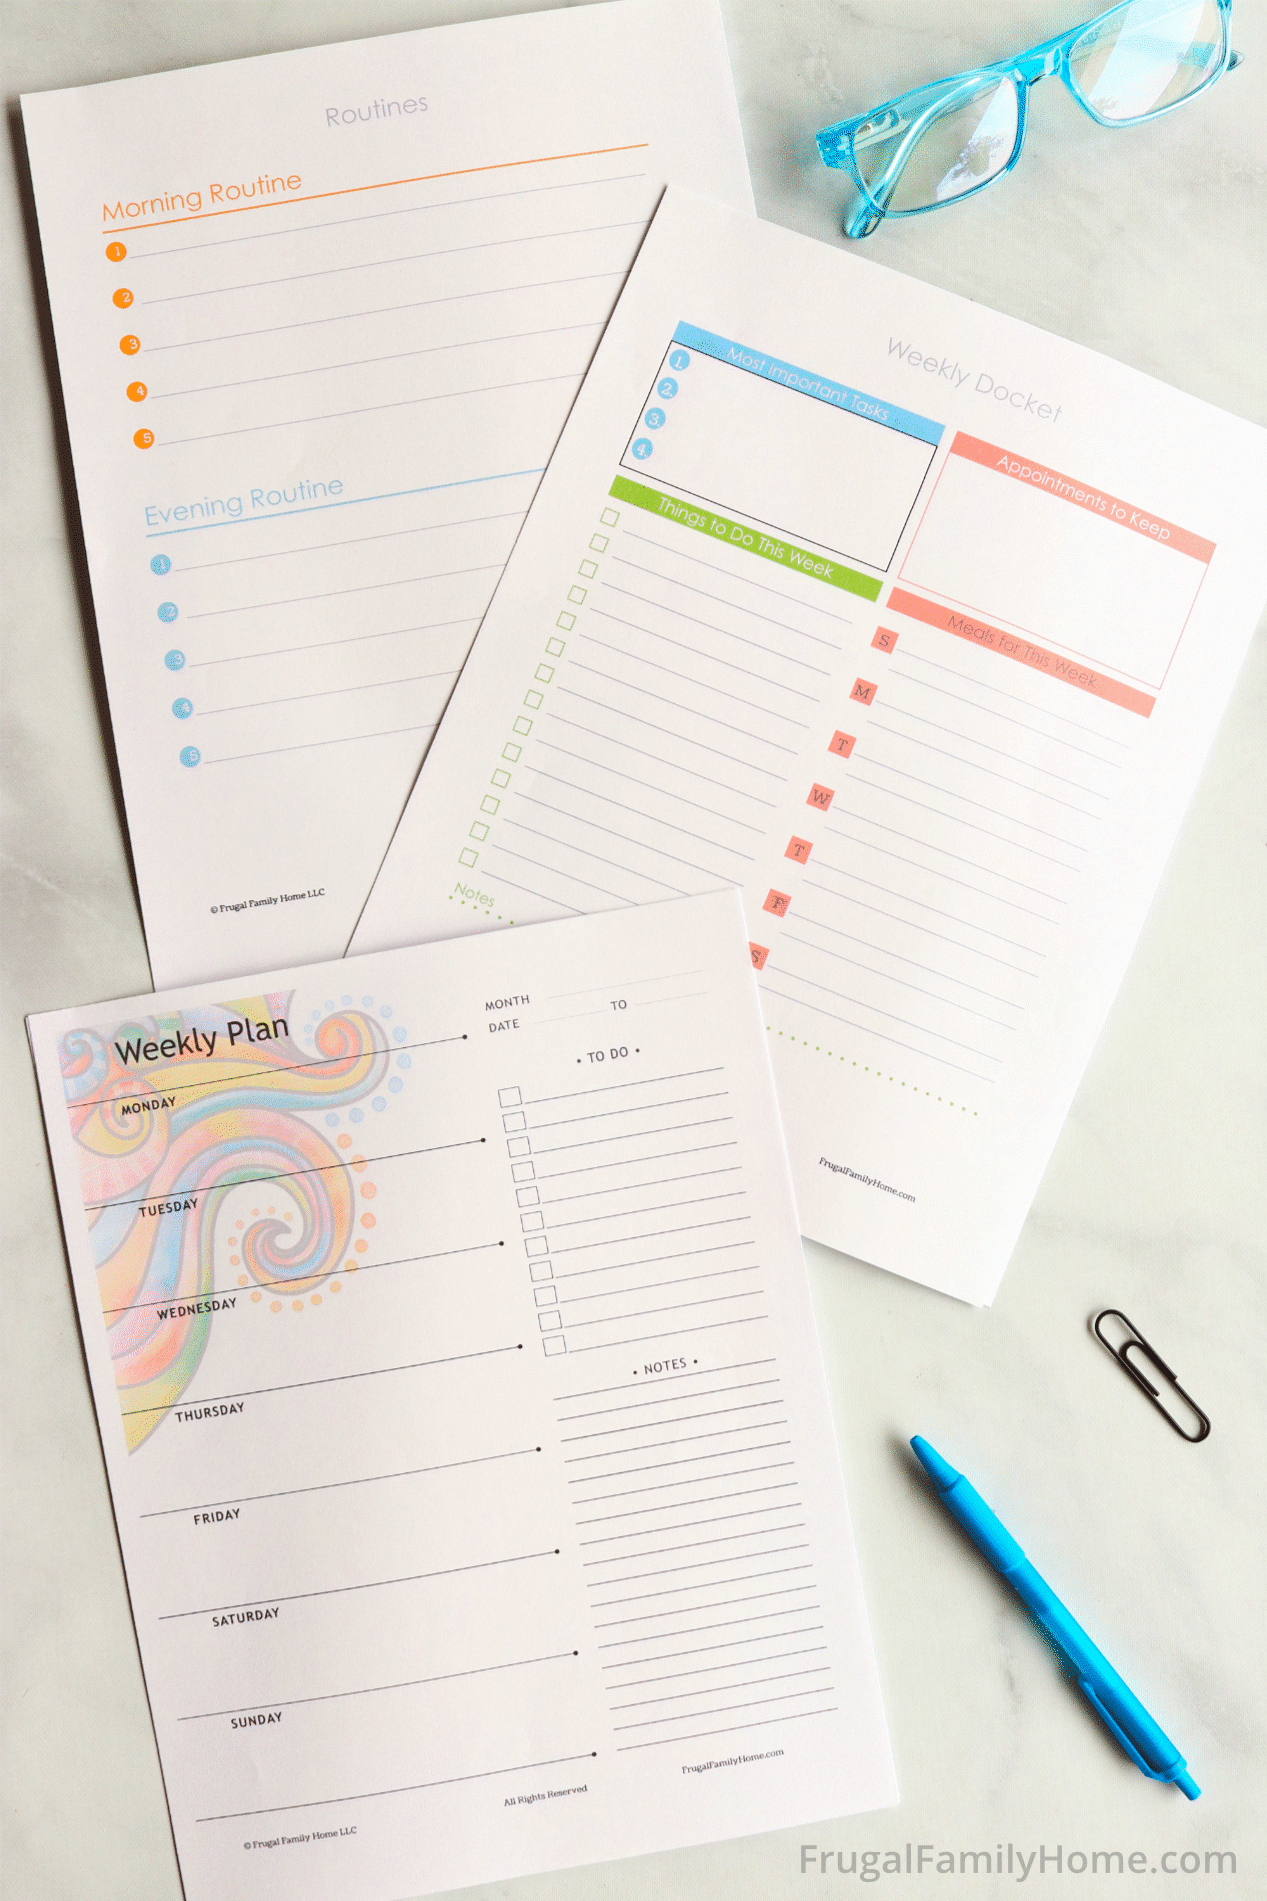 A few of the weekly planning pages in the Chaos to Calm Life Planner